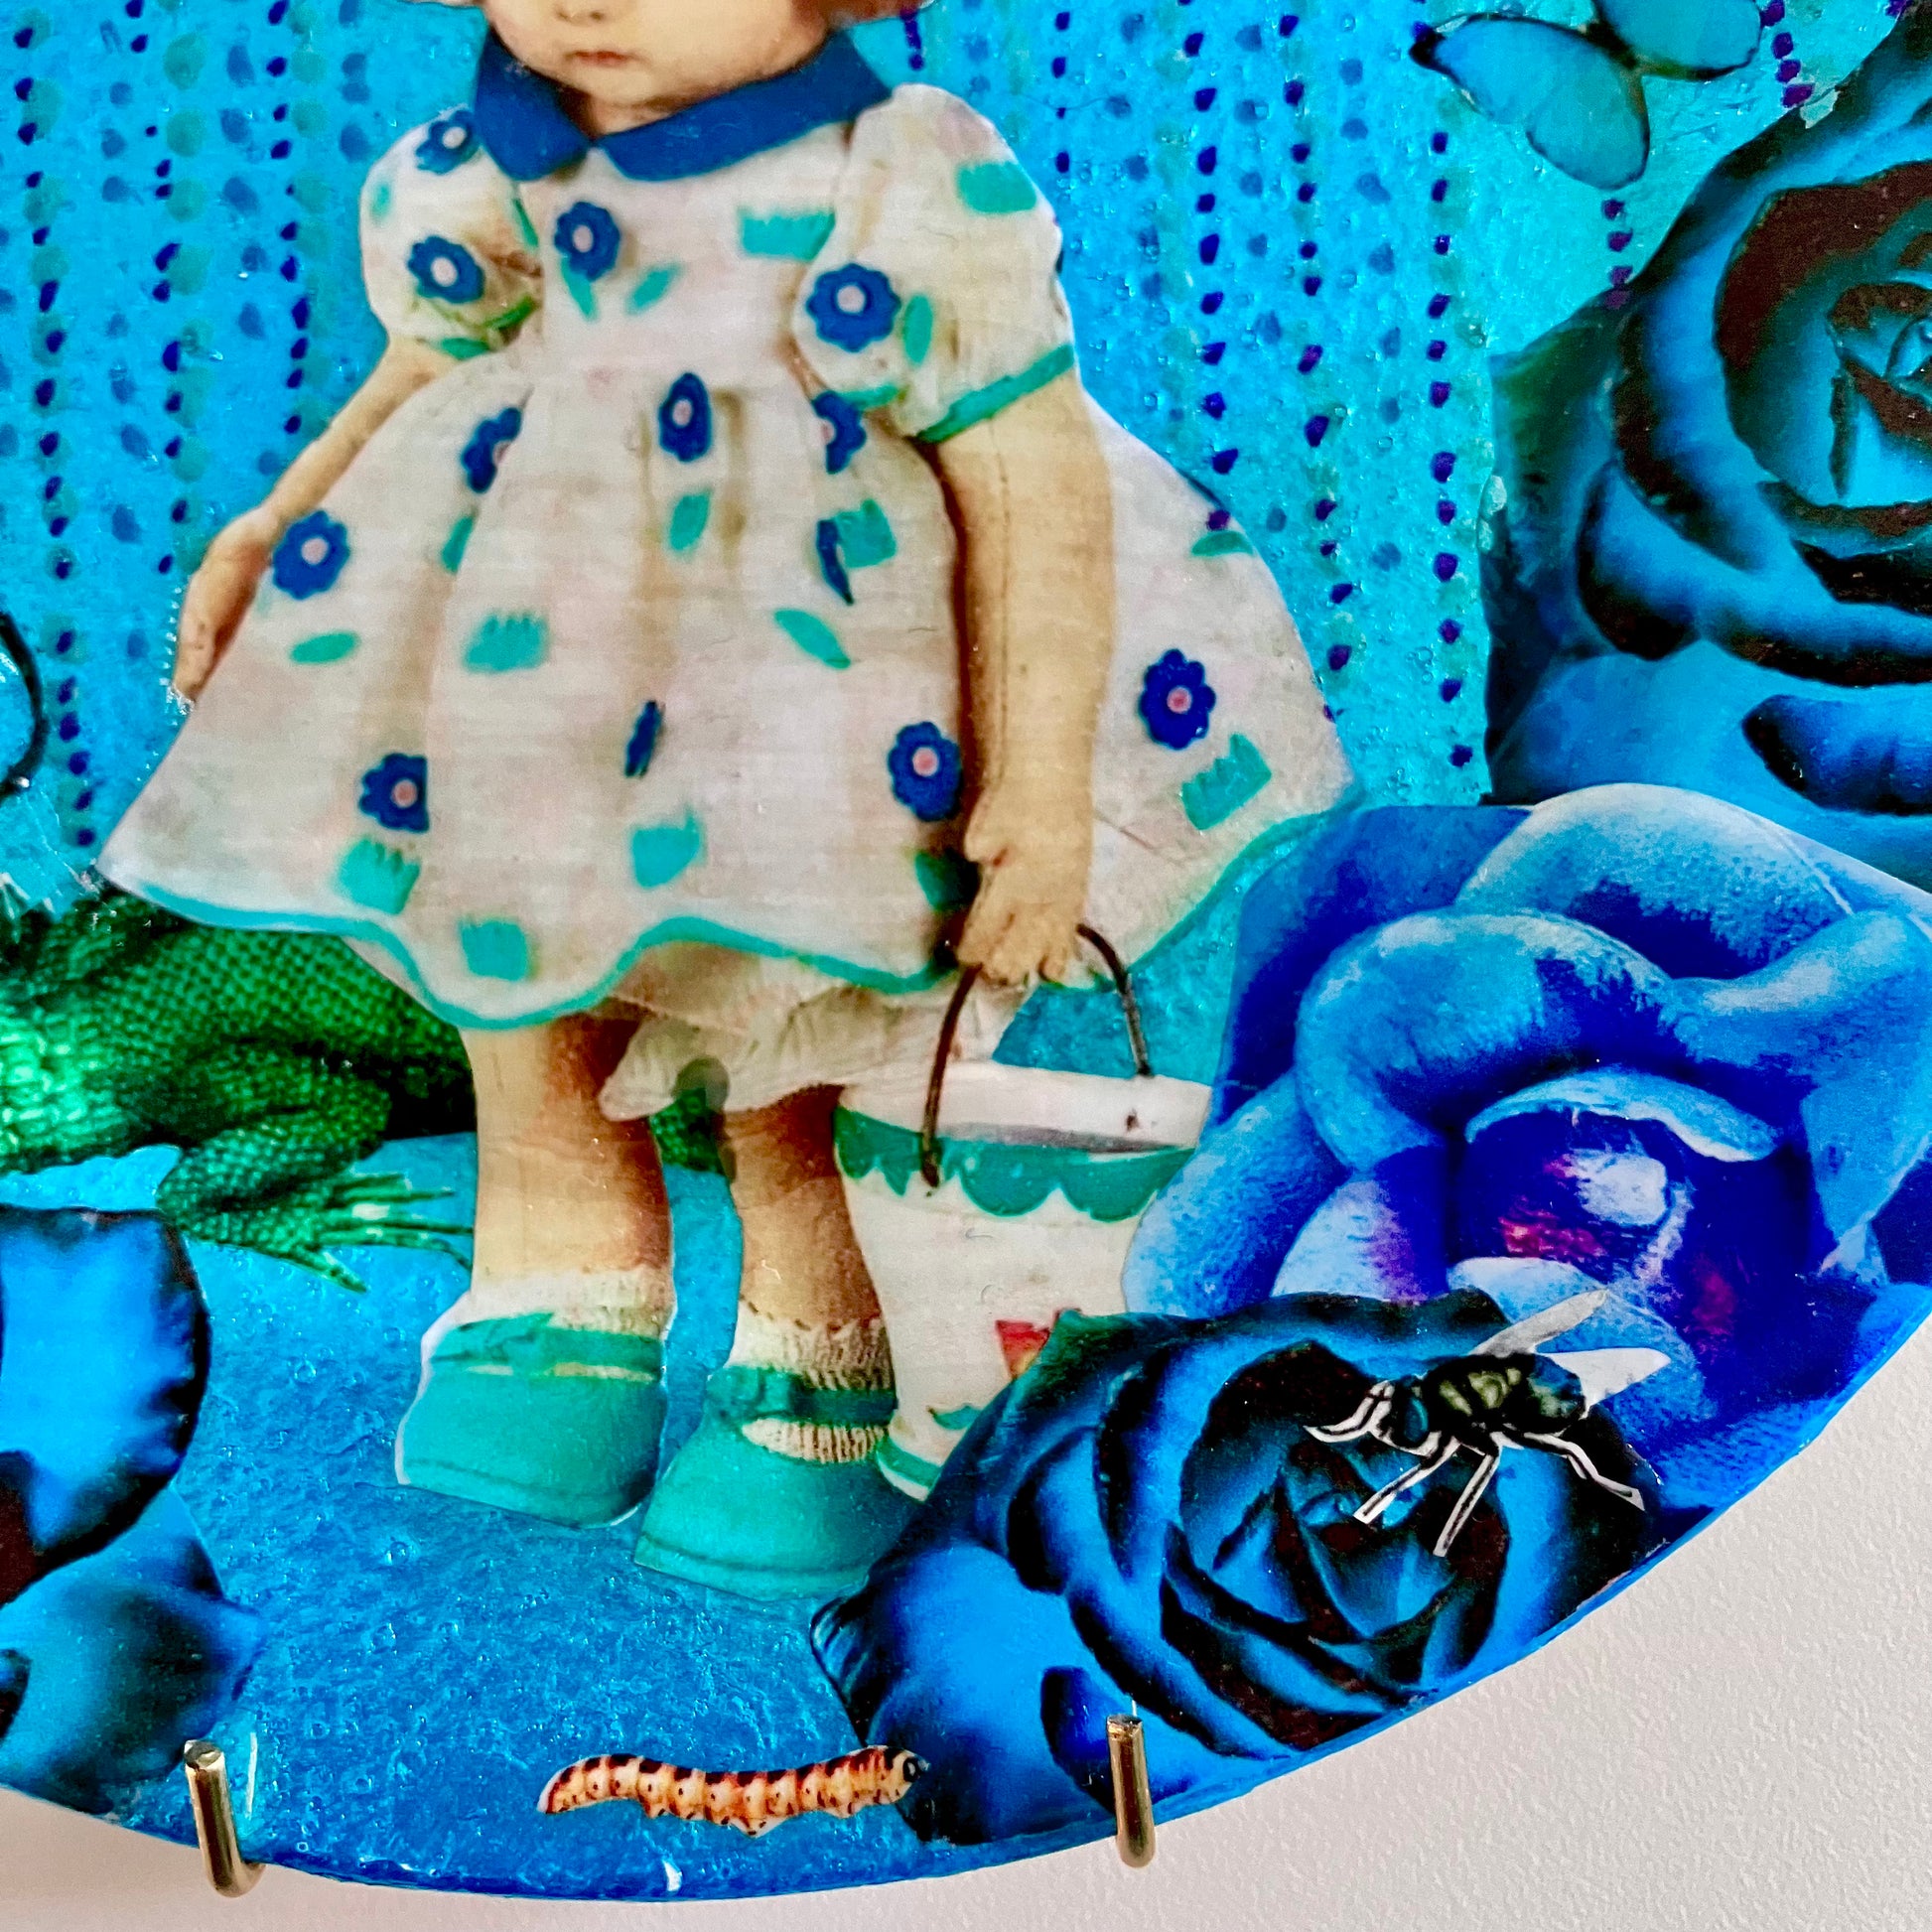 "Smells Like Failure" Wall Plate by House of Frisson, closeup detail of the collage showing a vintage doll, a lizard, and blue roses.